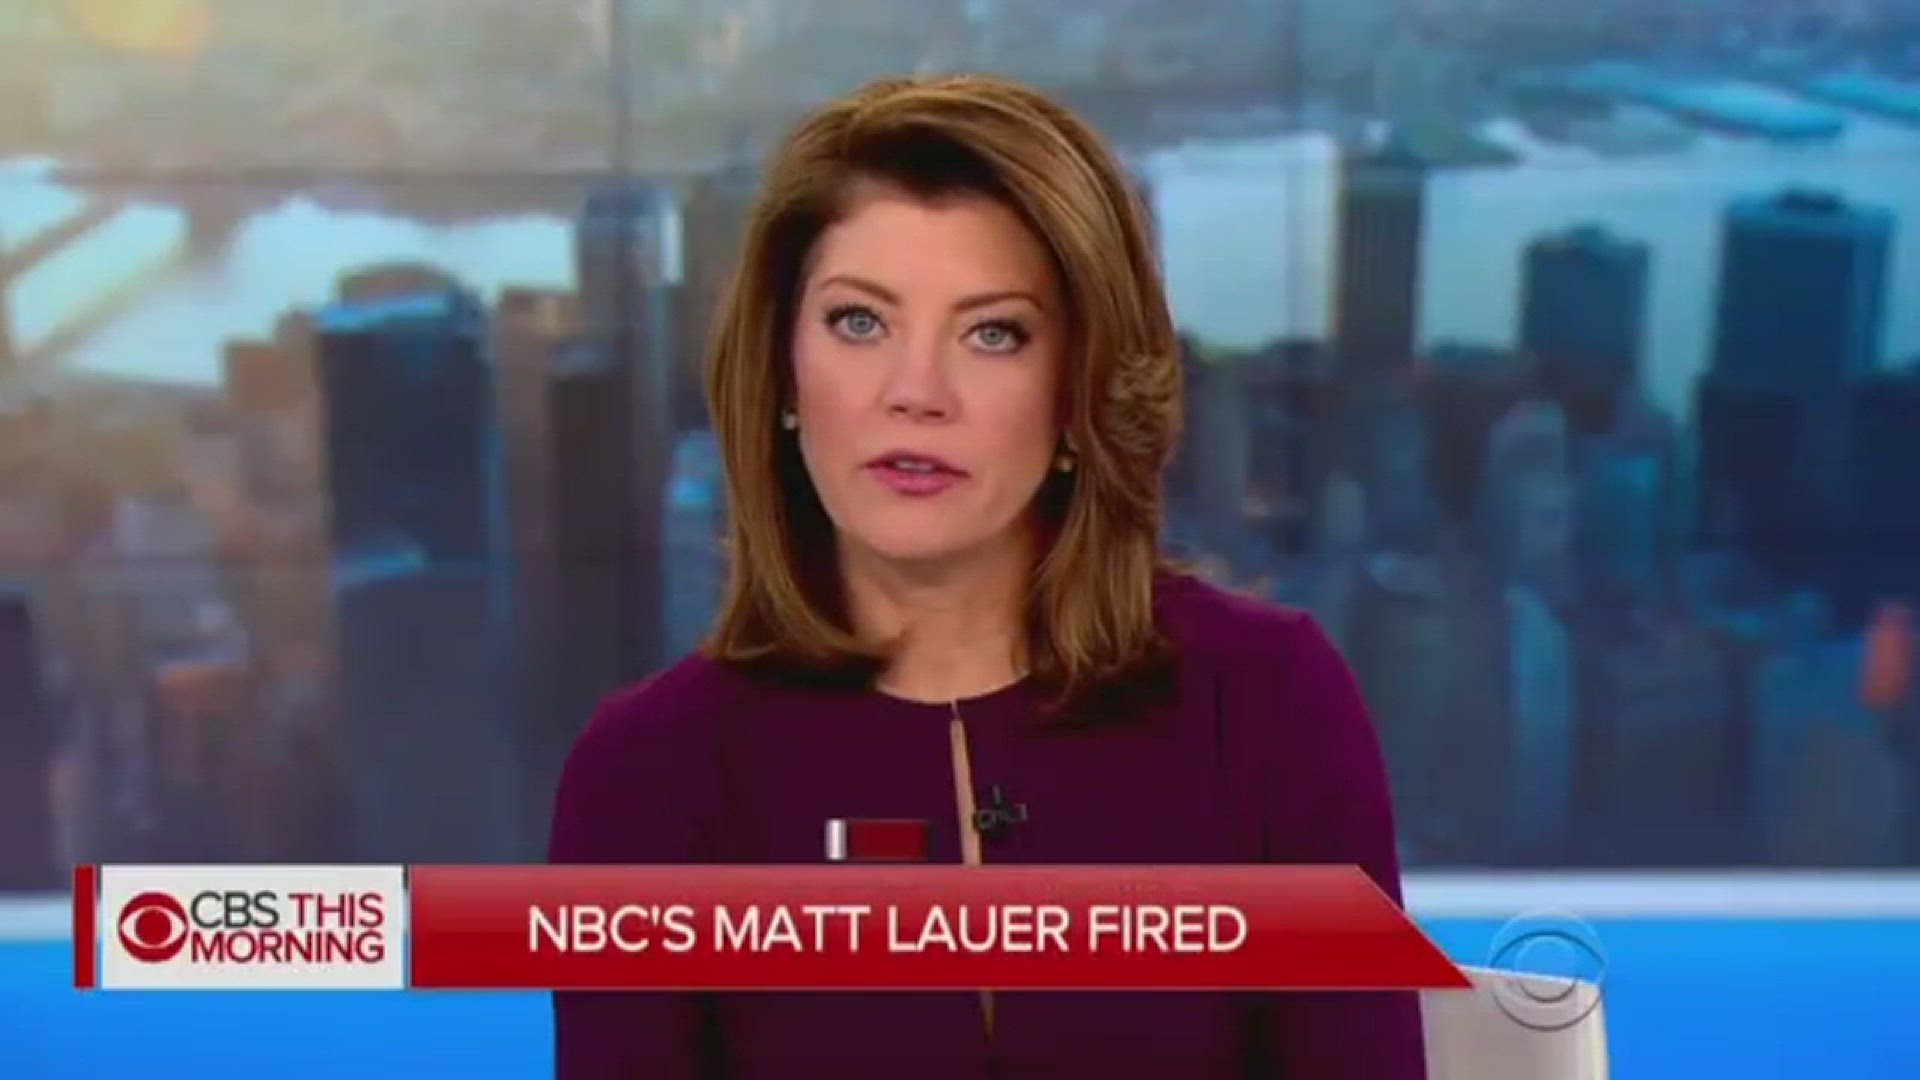 Matt Lauer Fired From NBC News After Allegation of Inappropriate Sexual Behavior